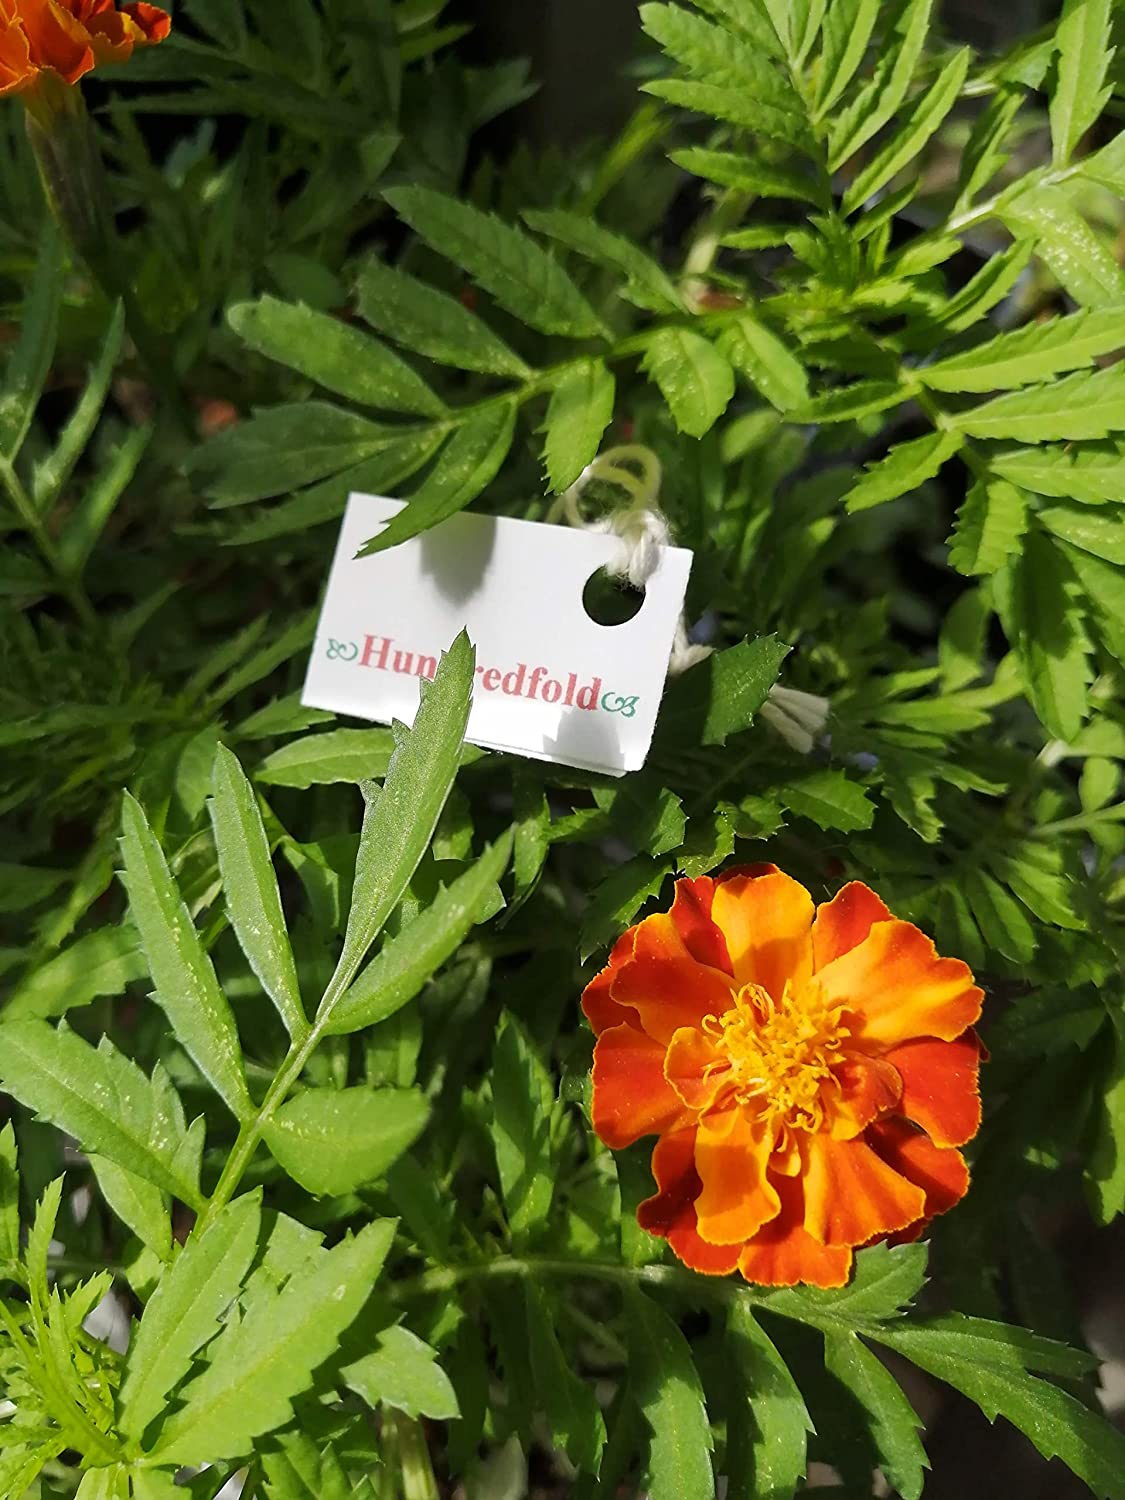 Hundredfold Brocade Mix French Marigold 200 Flower Seeds - Tagetes patula, as an Excellent Companion Plant for Kale, Tomato & Cucumber